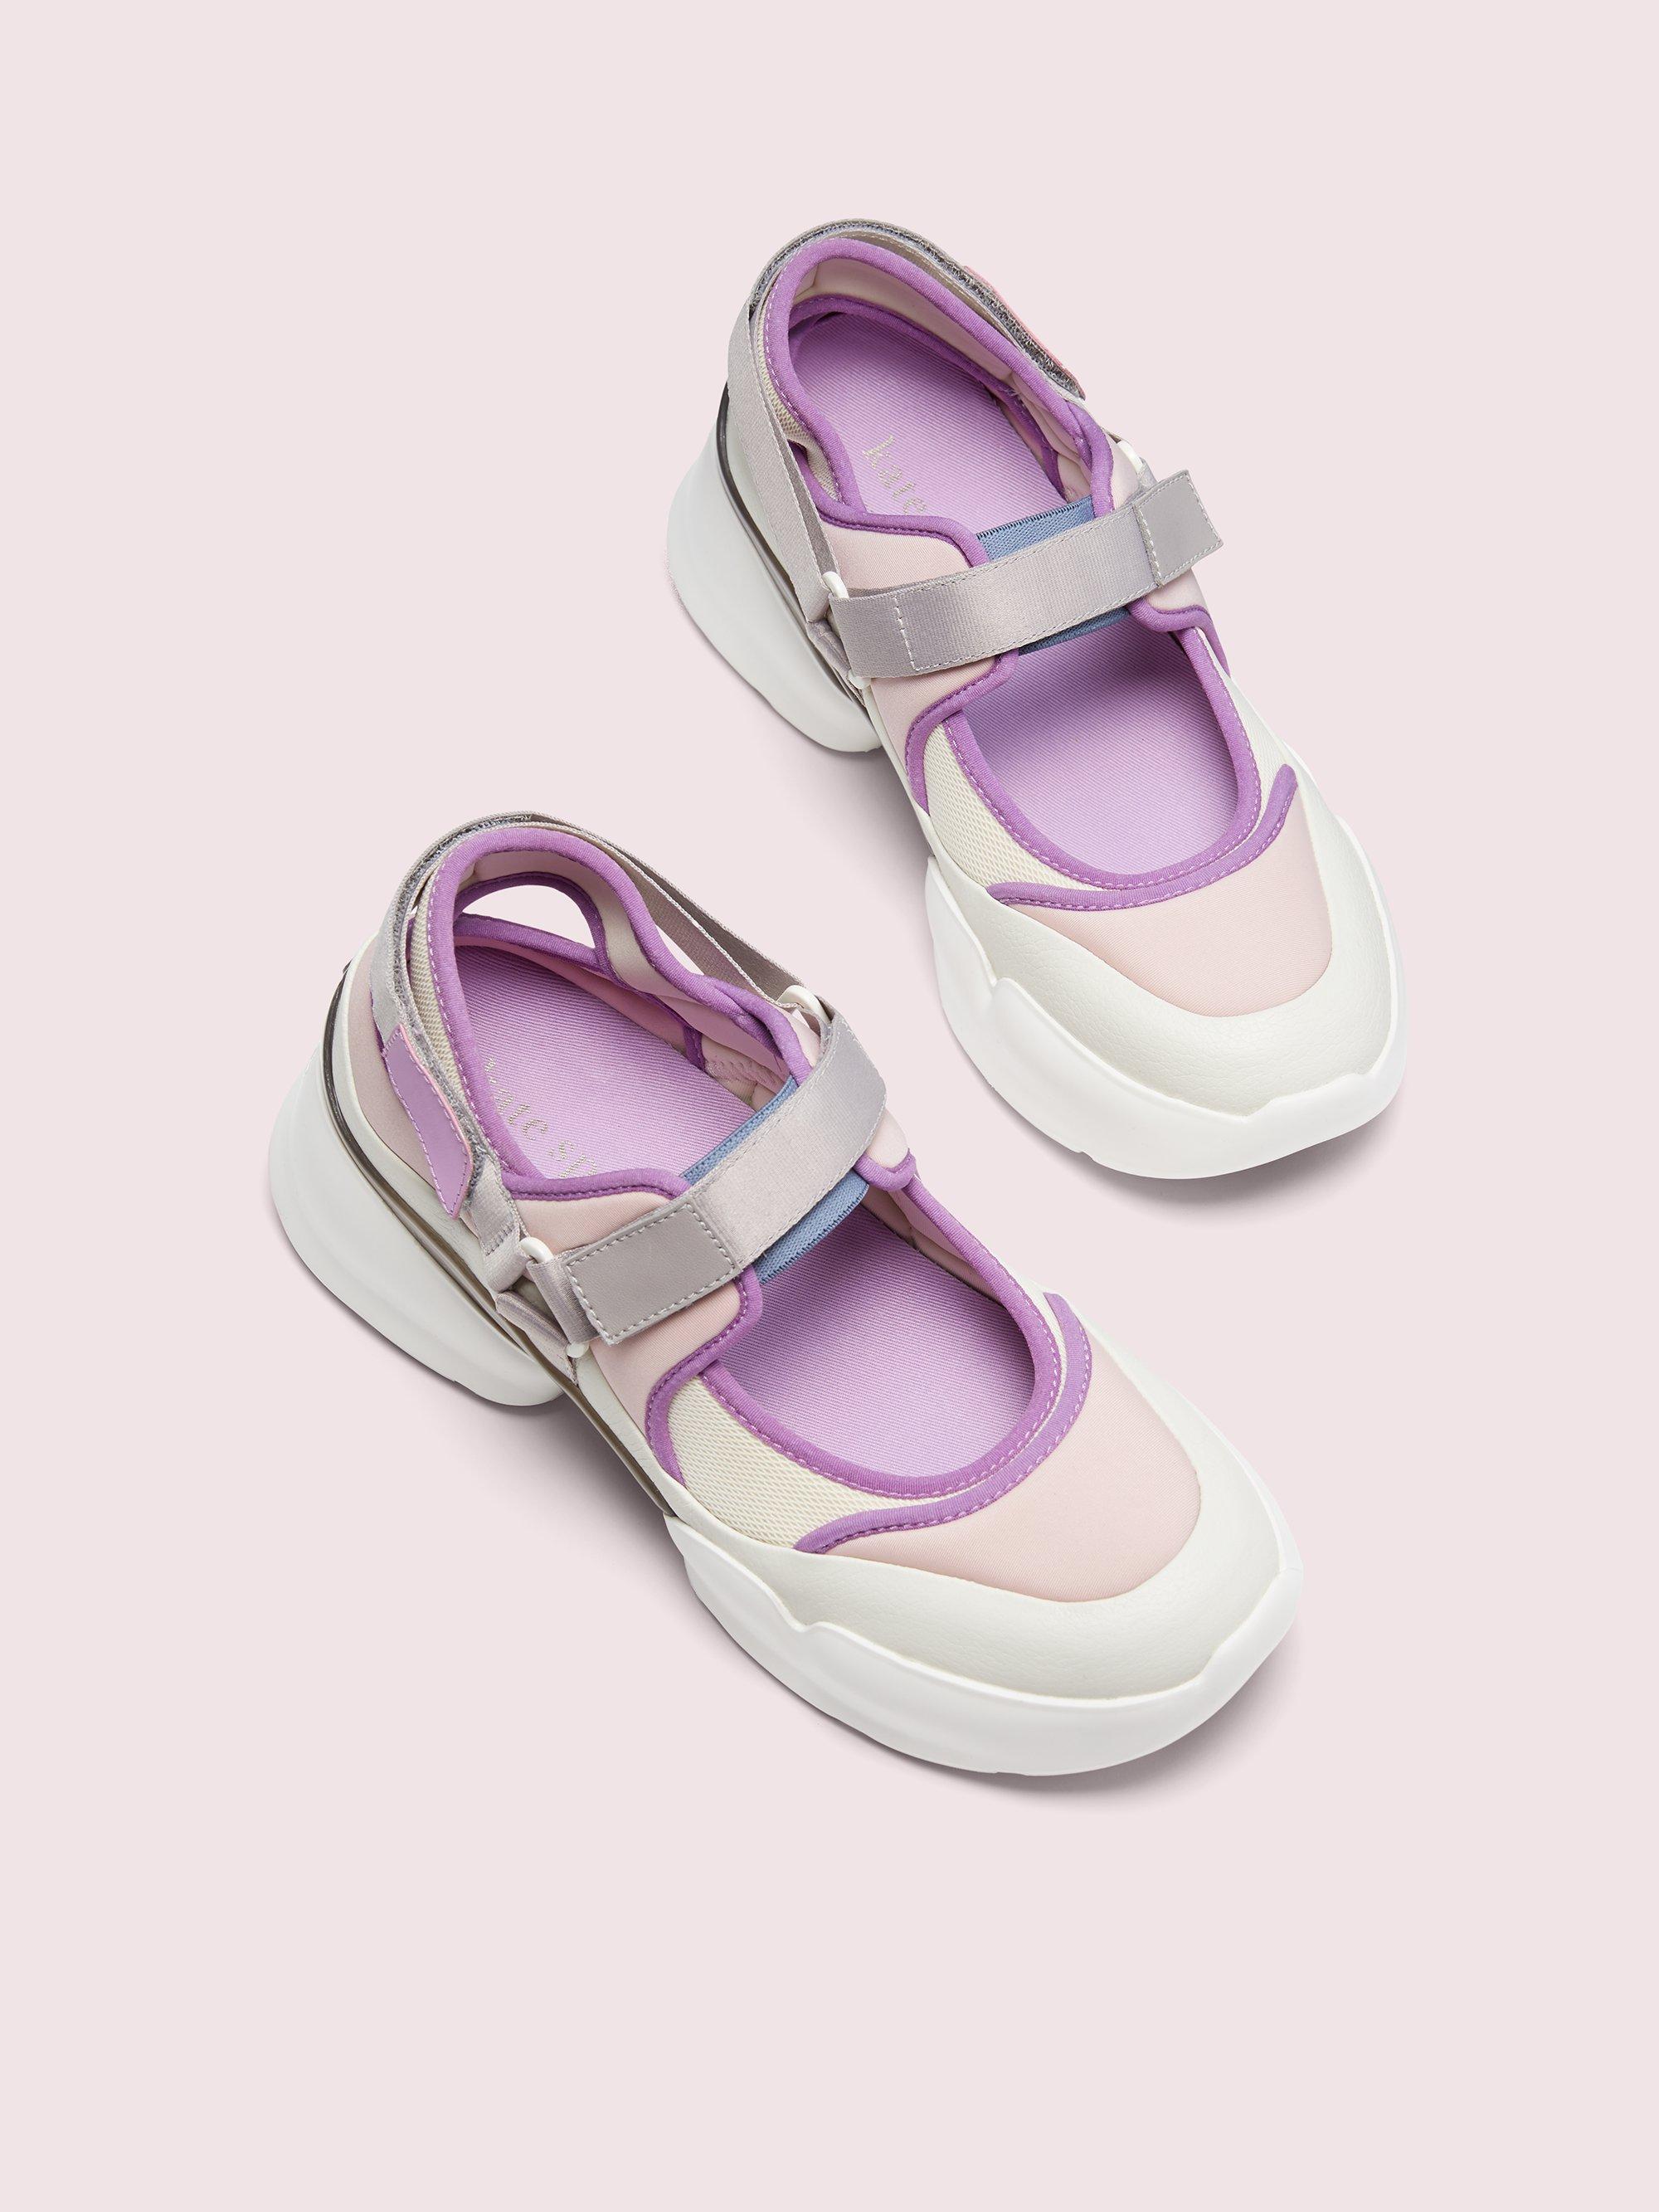 Kate Spade Rubber Cloud Cutout Sneakers in Pink - Lyst